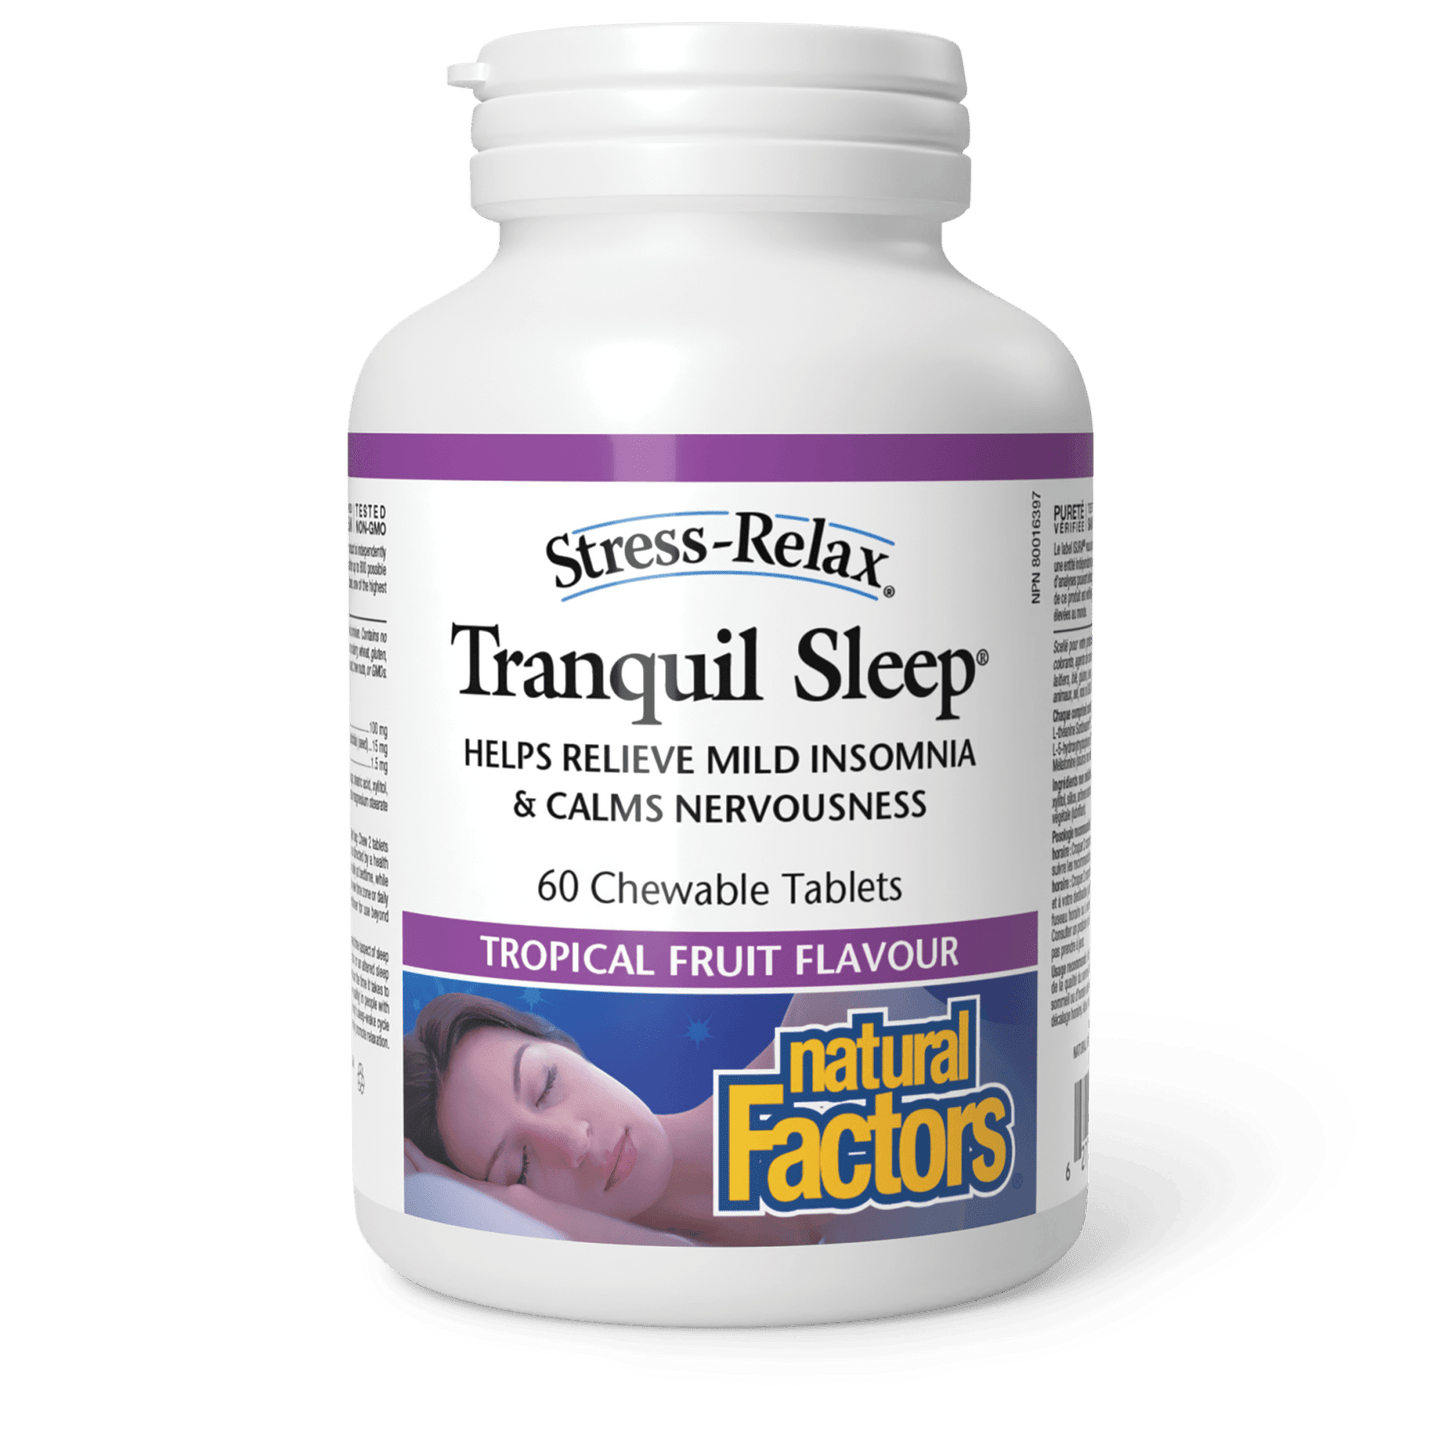 Tranquil Sleep, Tropical Fruit, Stress-Relax, Natural Factors|v|image|2831